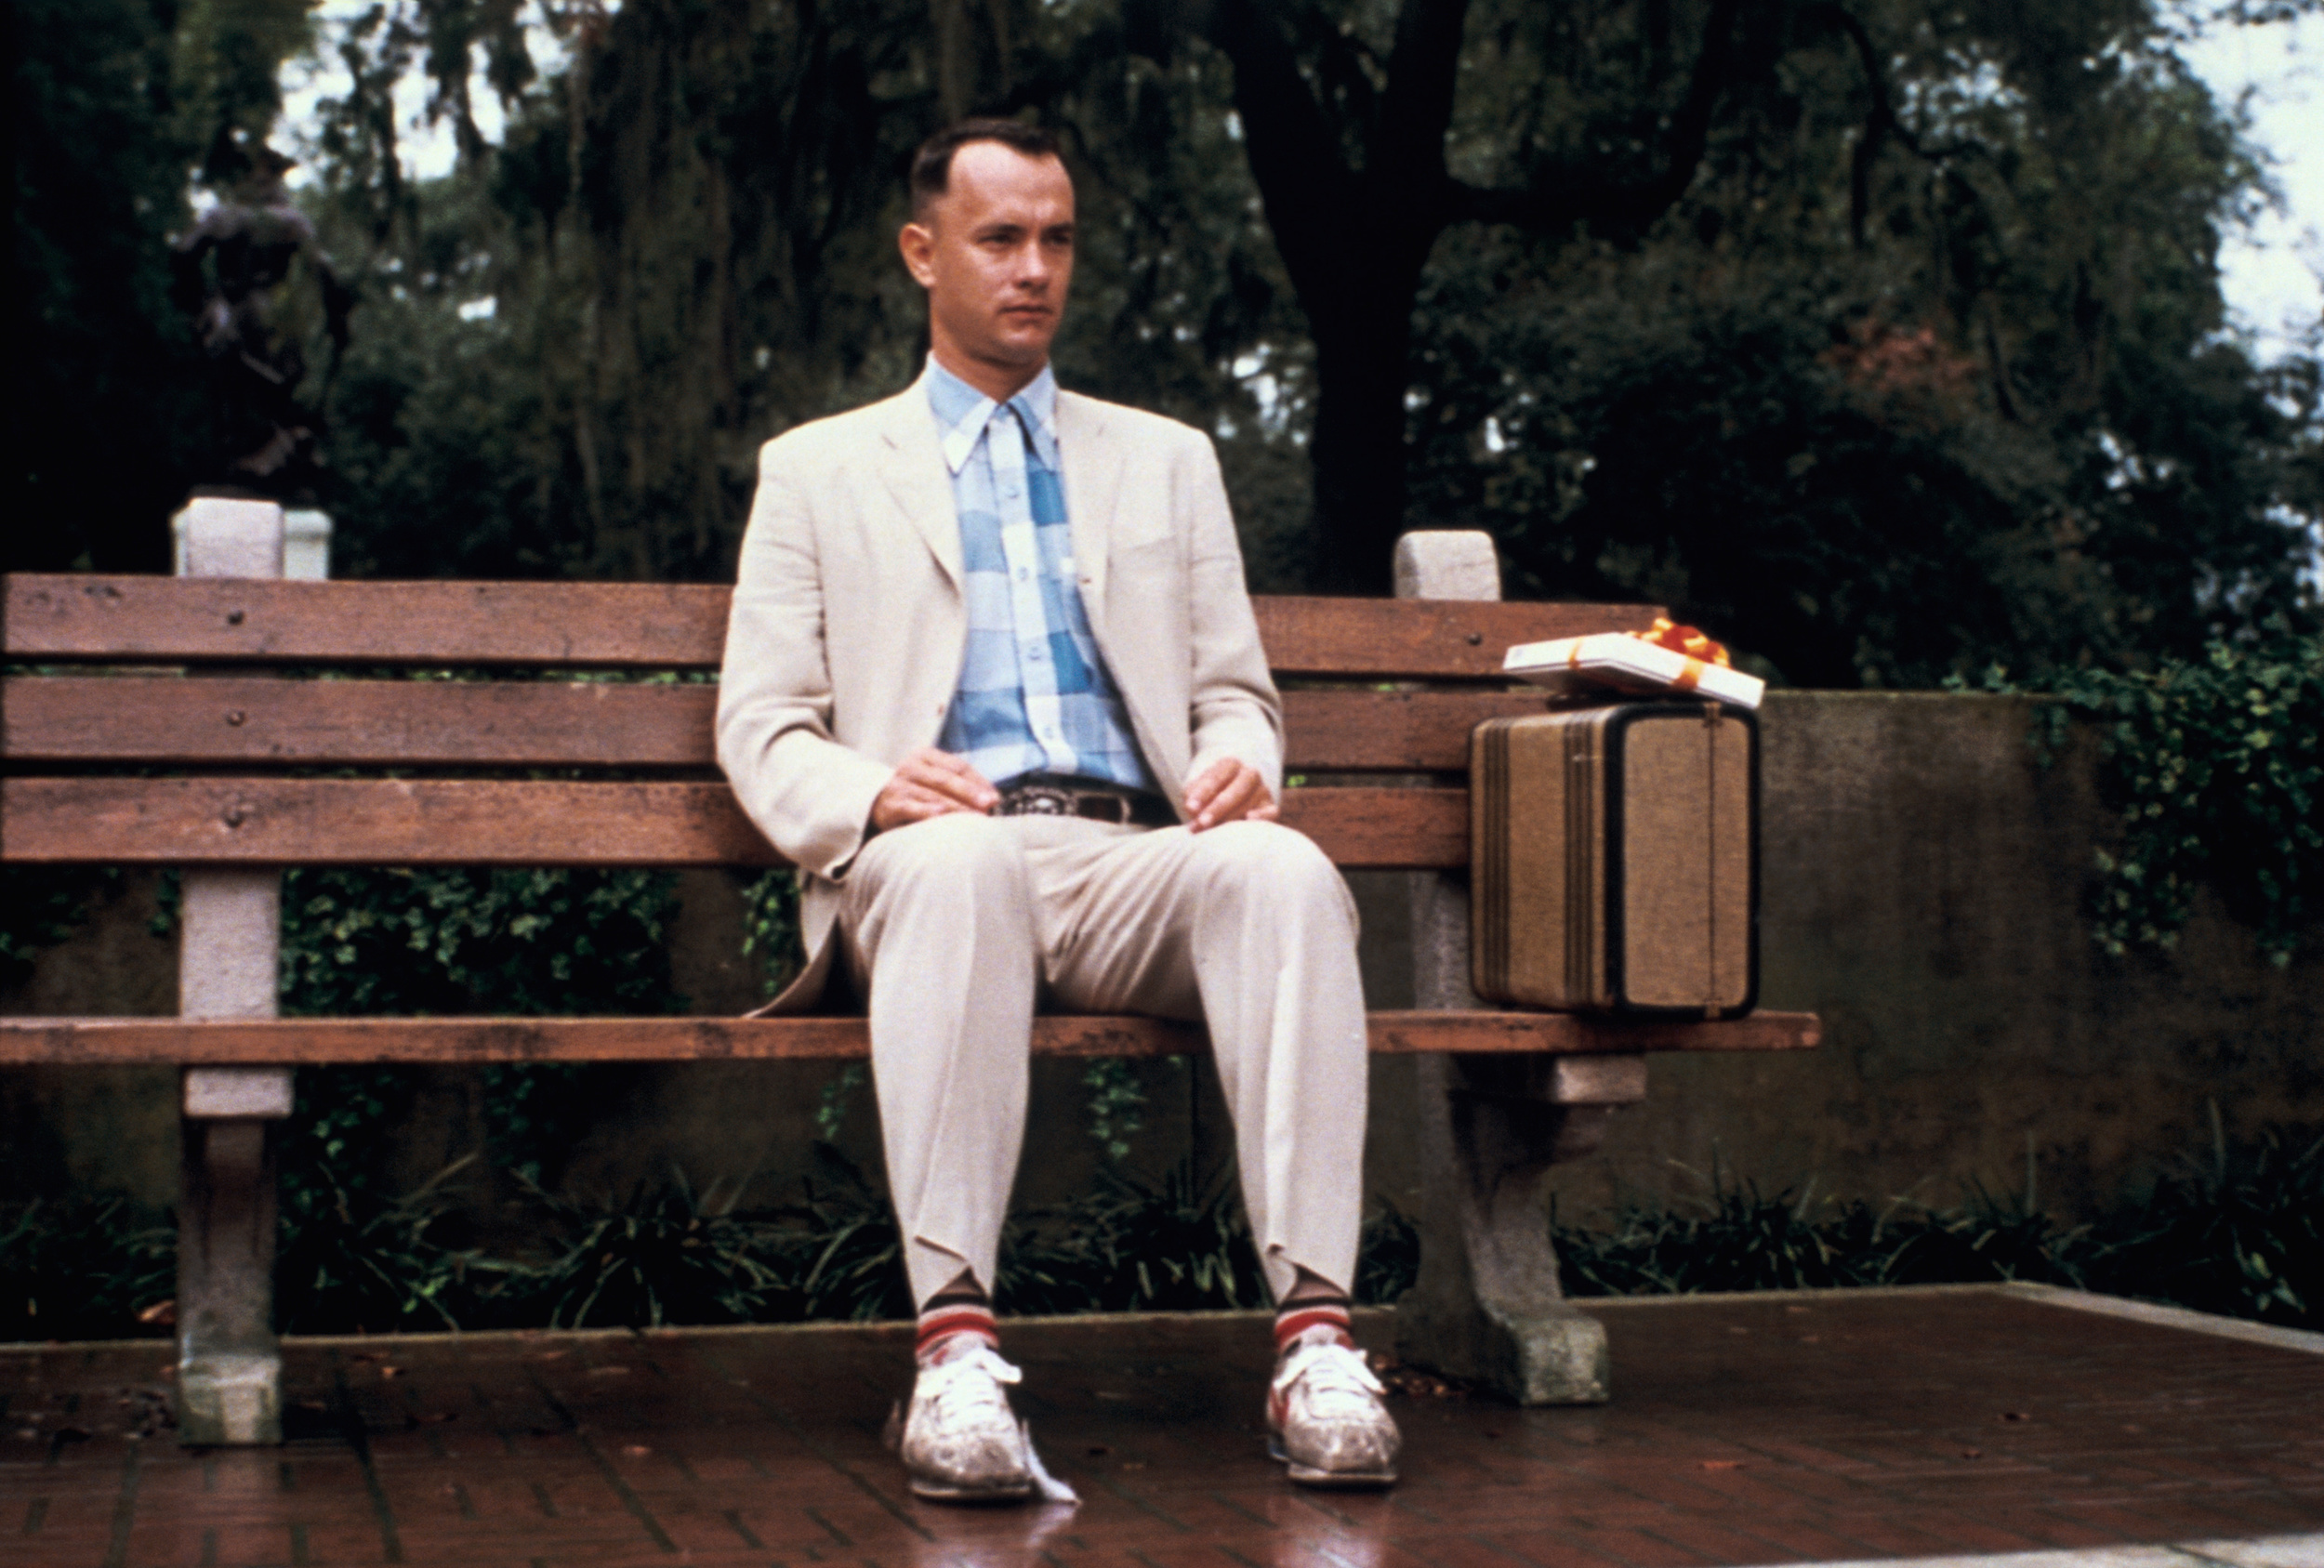 <p><em>Forrest Gump</em> began life as a 1986 novel by Winston Groom. It’s pretty much the only novel that Groom is known for, but it brought him a great deal of success. The book actually wasn’t super popular when it was released, but it sold over one million copies after the film came out.</p><p>You may also like: <a href='https://www.yardbarker.com/entertainment/articles/the_films_of_ridley_scott_ranked_100123/s1__33875138'>The films of Ridley Scott, ranked</a></p>